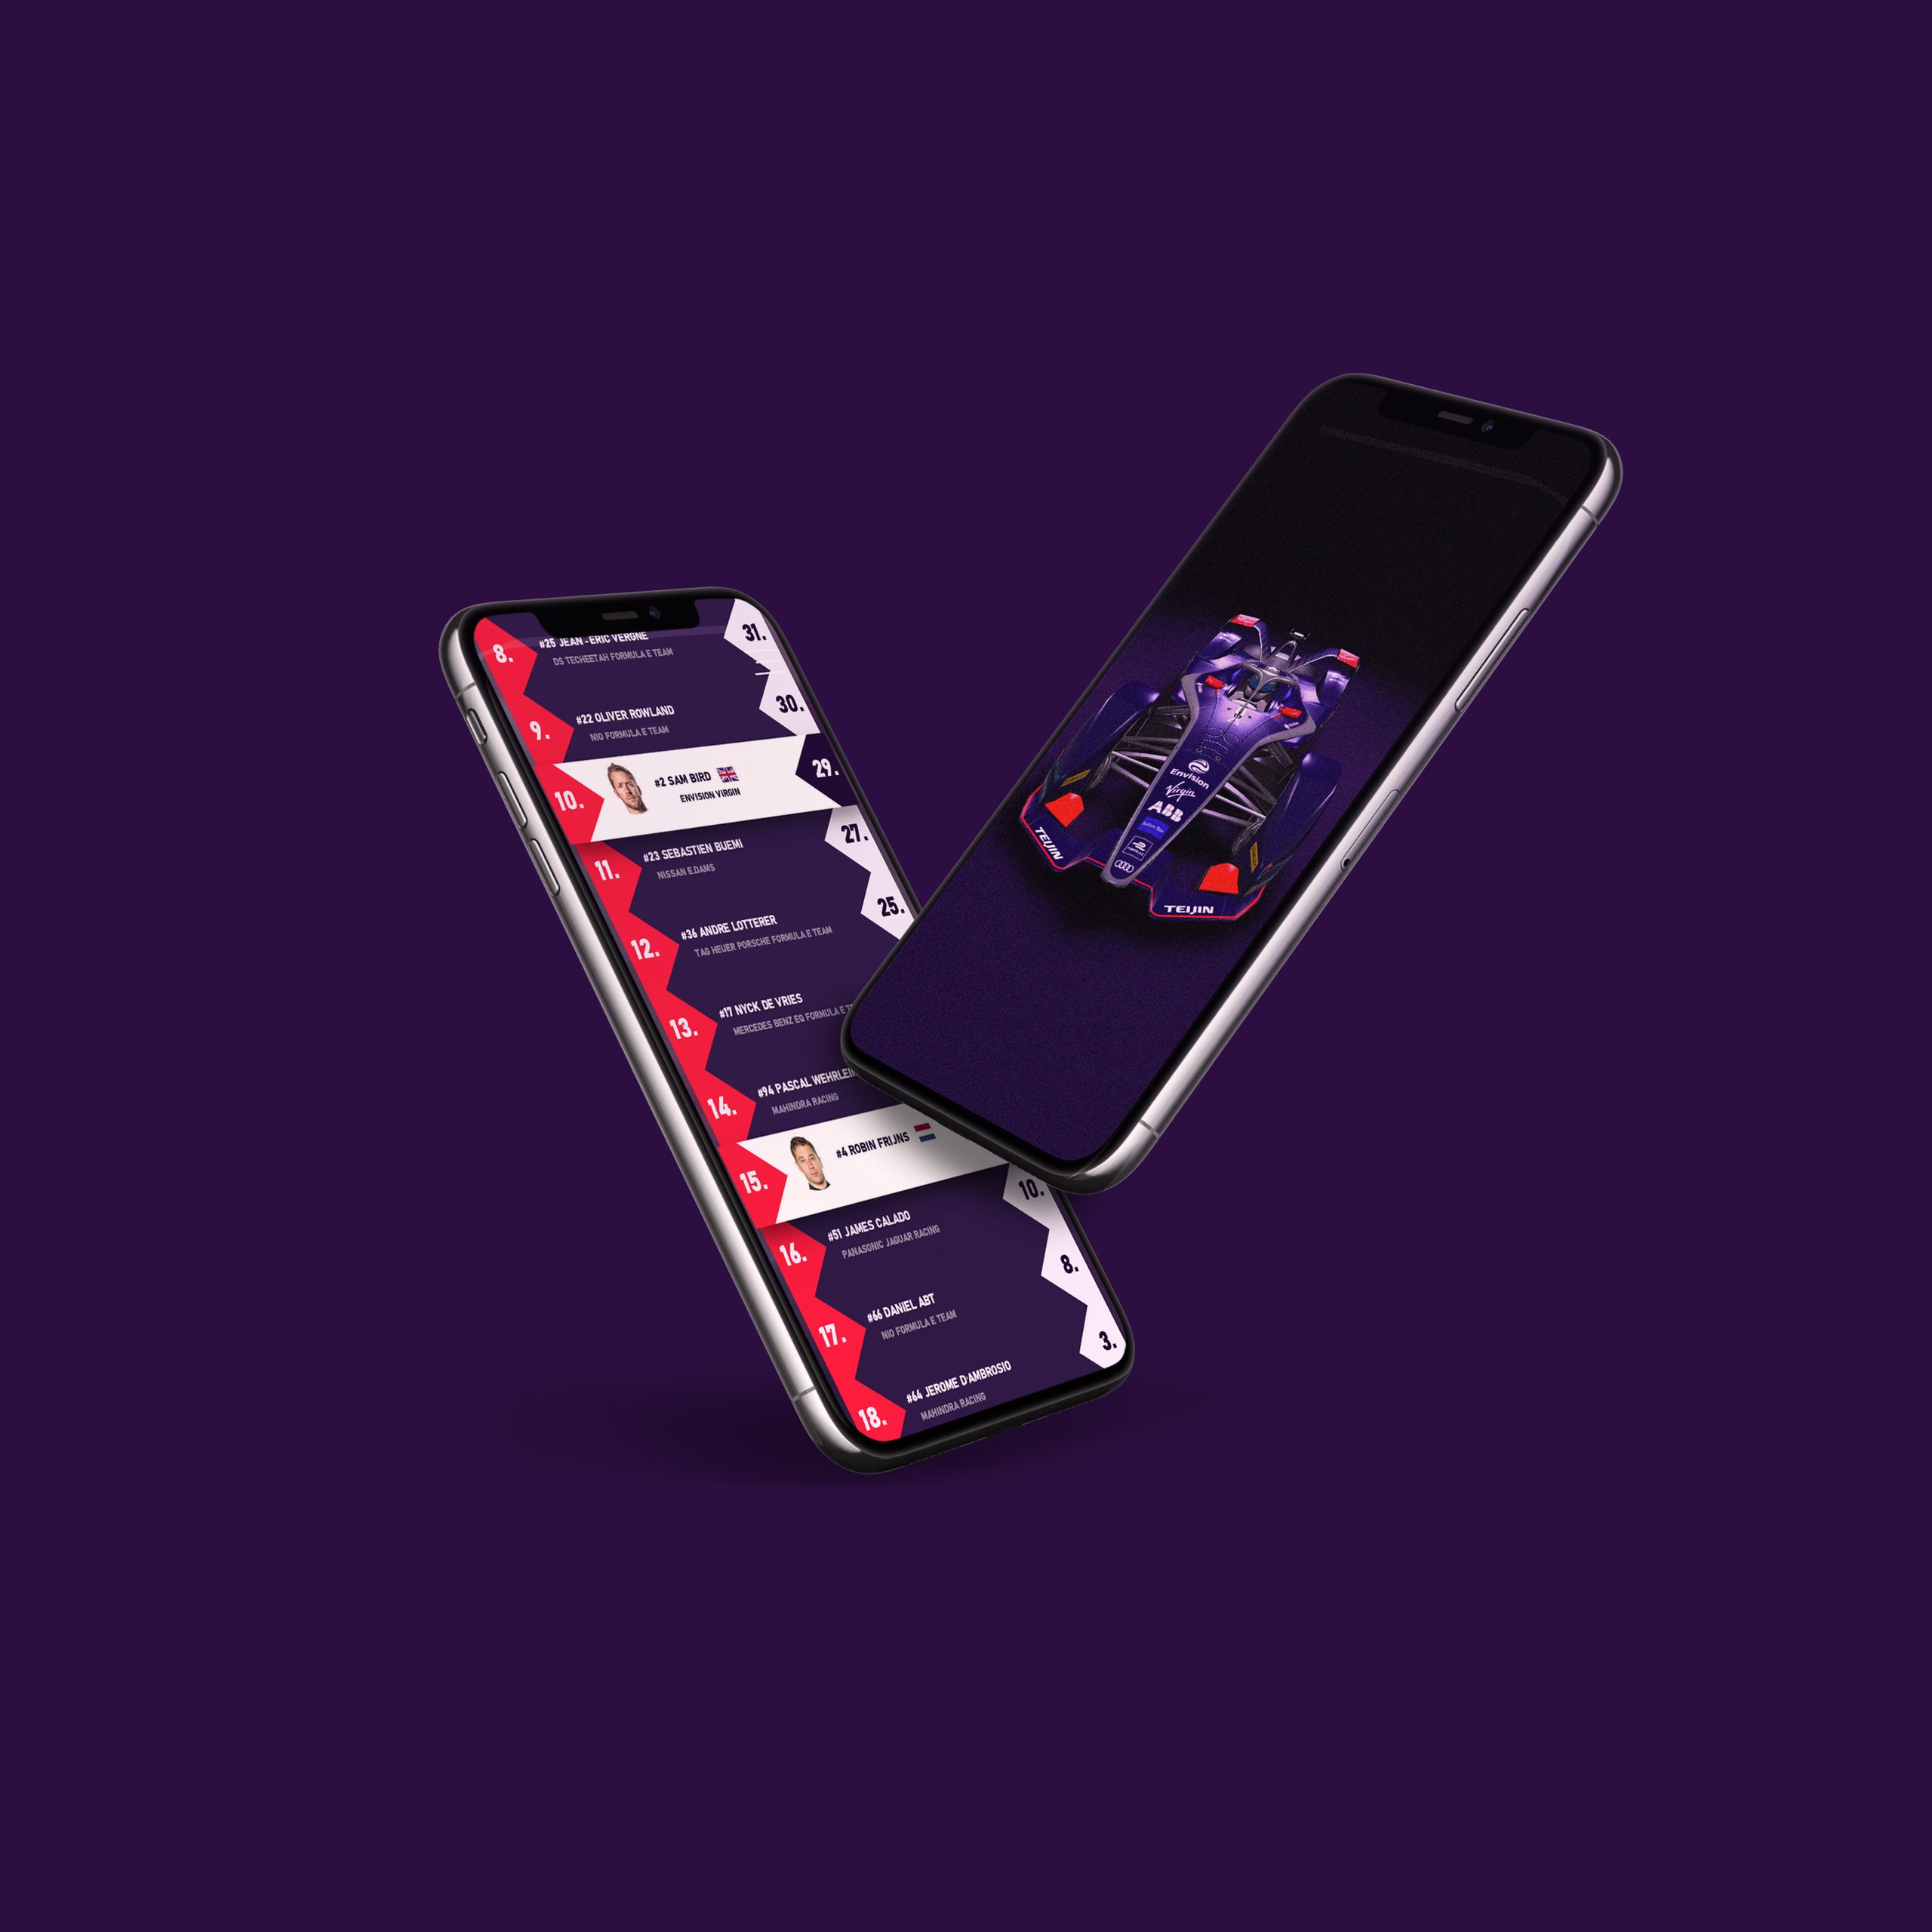 Two mobile devices suspended in mid-air, showcasing the user interface and design concepts for the Virgin Racing virtual trackside experience project